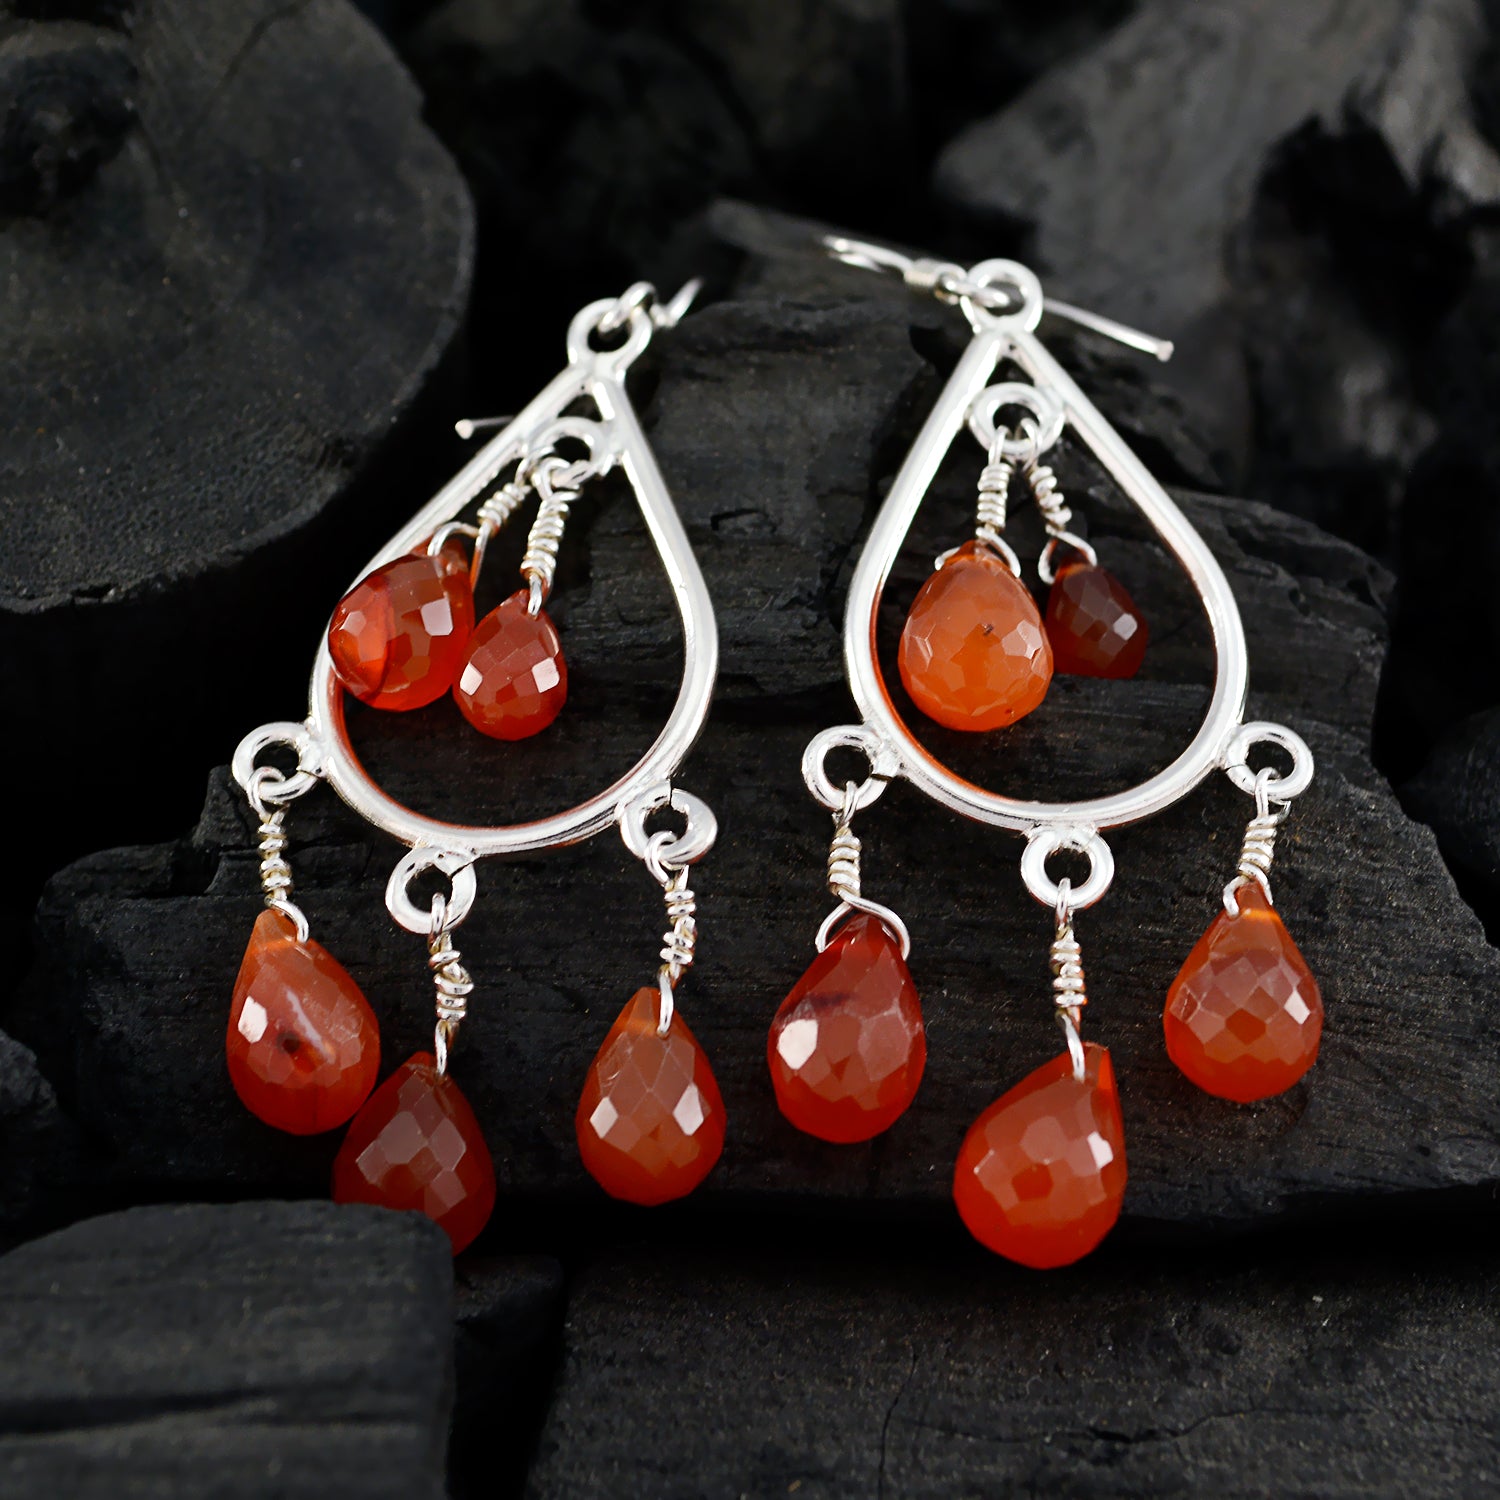 Riyo Real Gemstones pear Cabochon Red Onyx Silver Earring gift for easter Sunday